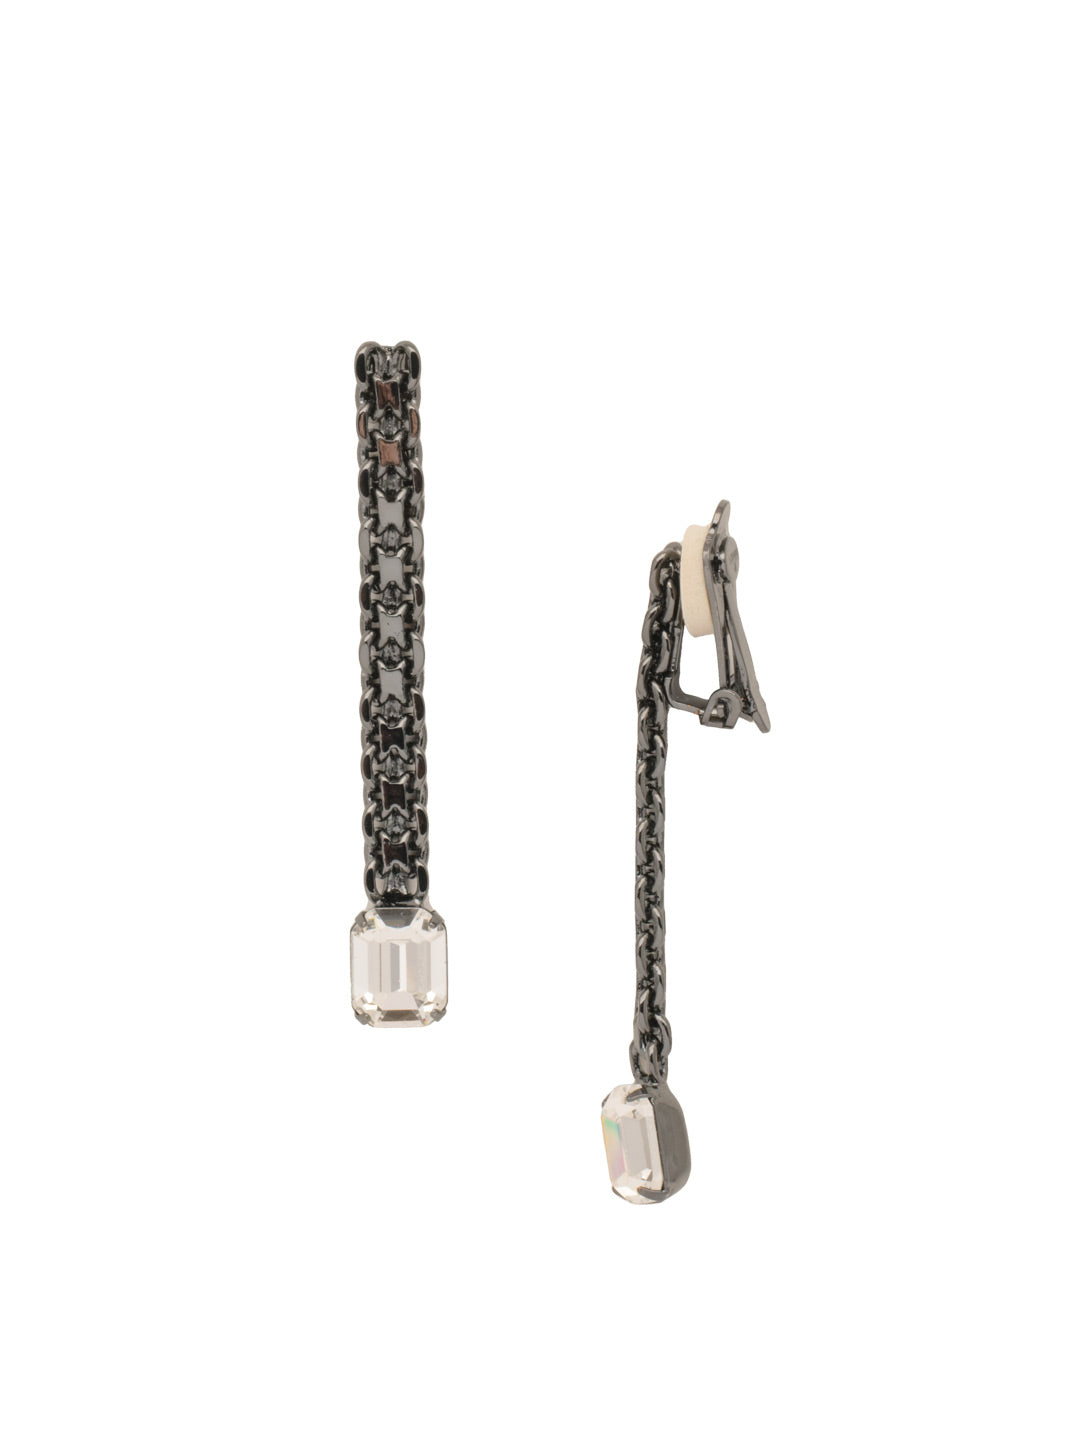 Graycen Clip On Earring - EEP15CGMMMO - The Graycen Dangle Earring is edgy. Show off the metal links affixed to a sparkling cushion octagon crystal when you're feeling a bit sassy. From Sorrelli's Midnight Moon collection in our Gun Metal finish.